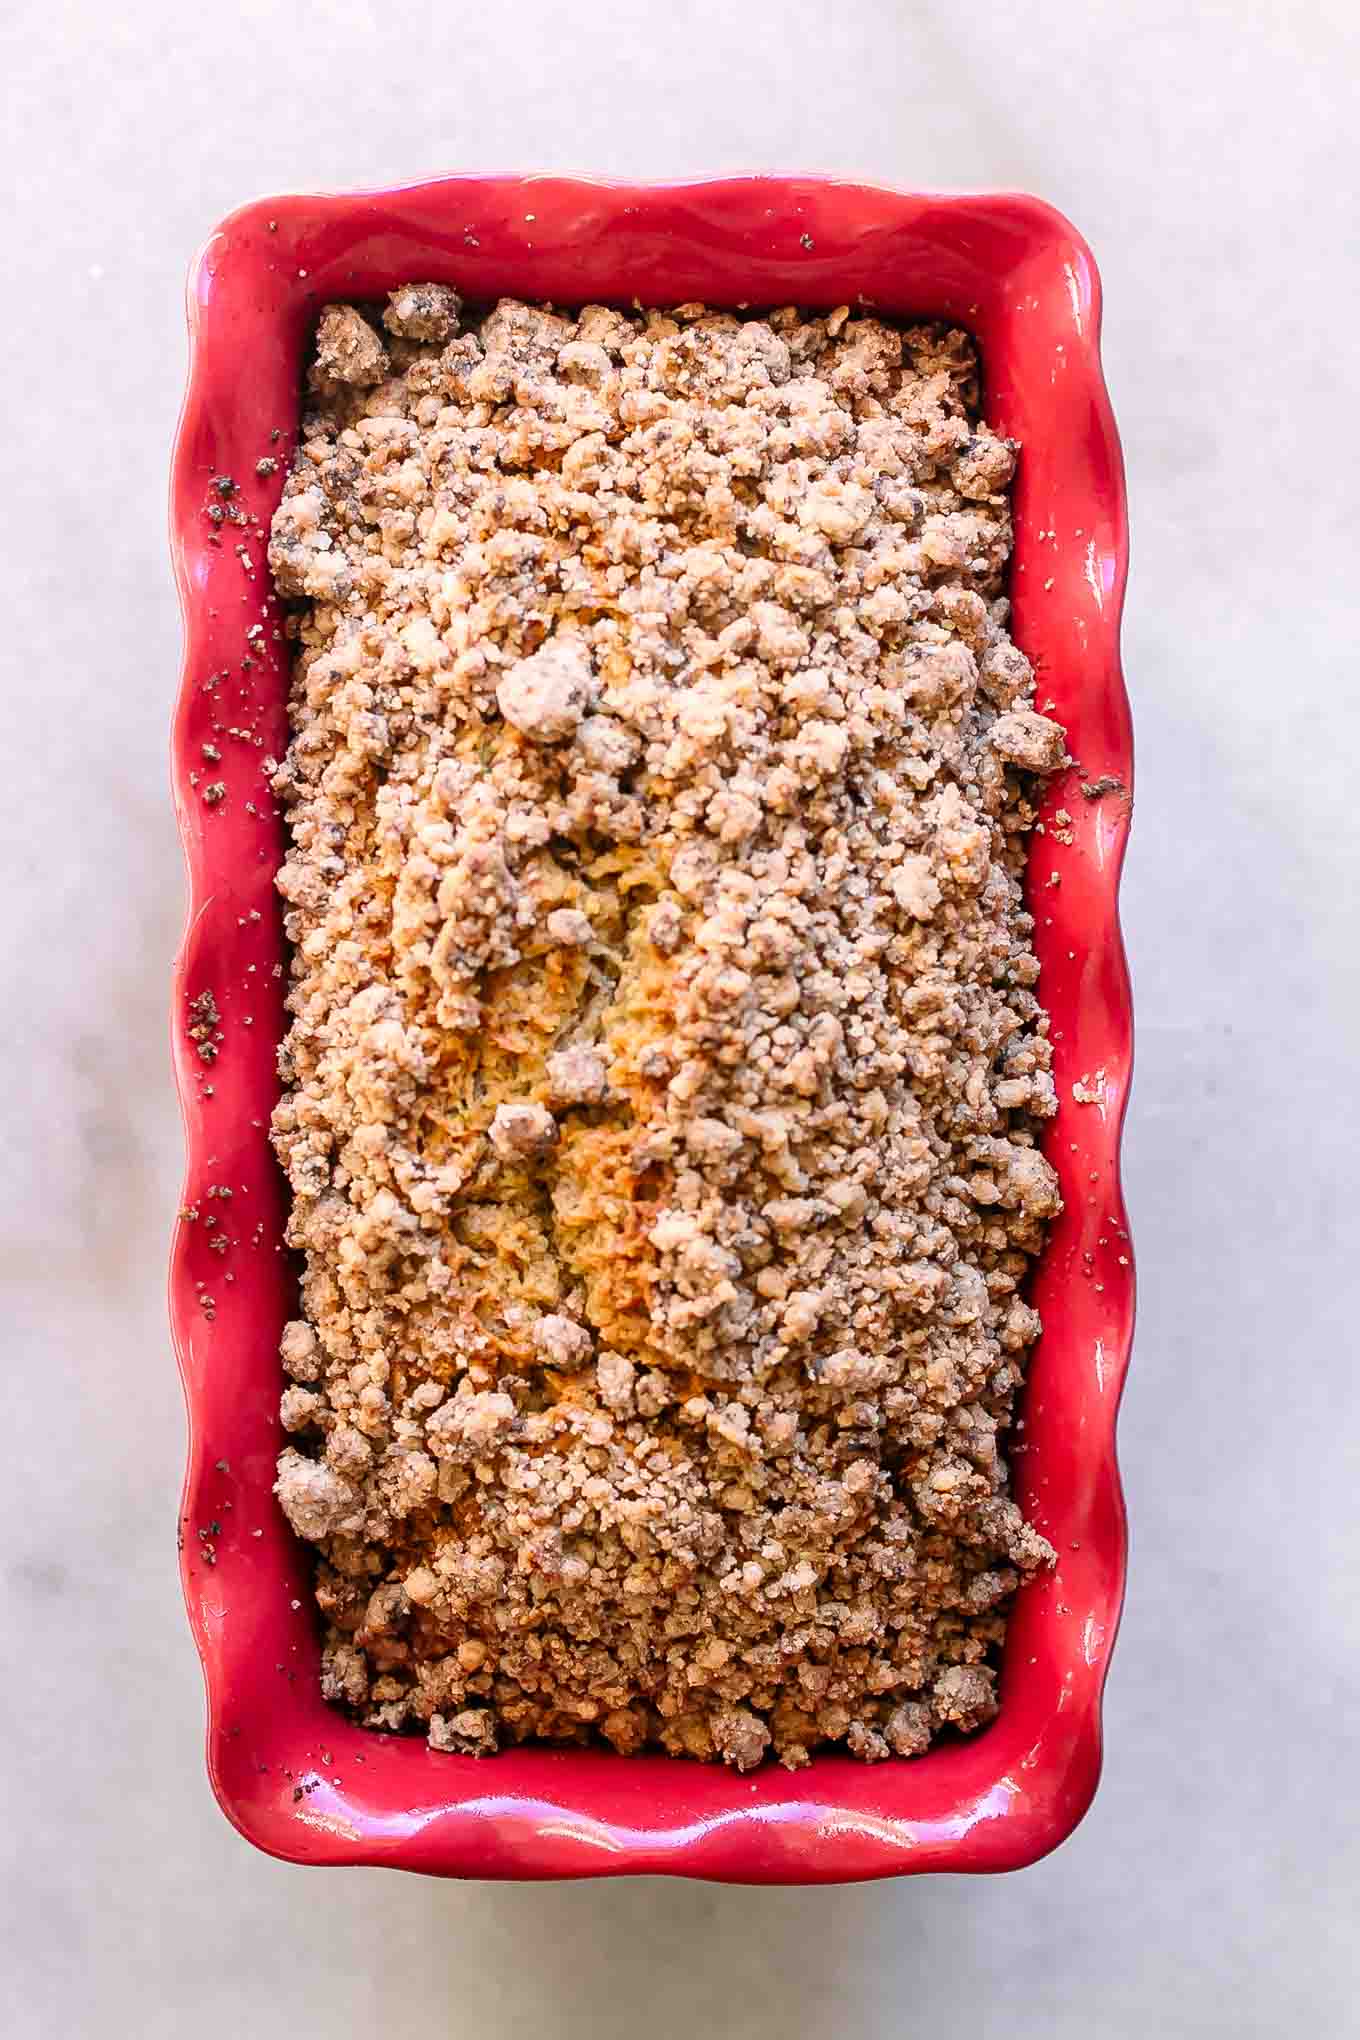 baked zucchini bread with a crumb topping in a red bread pan on a white table